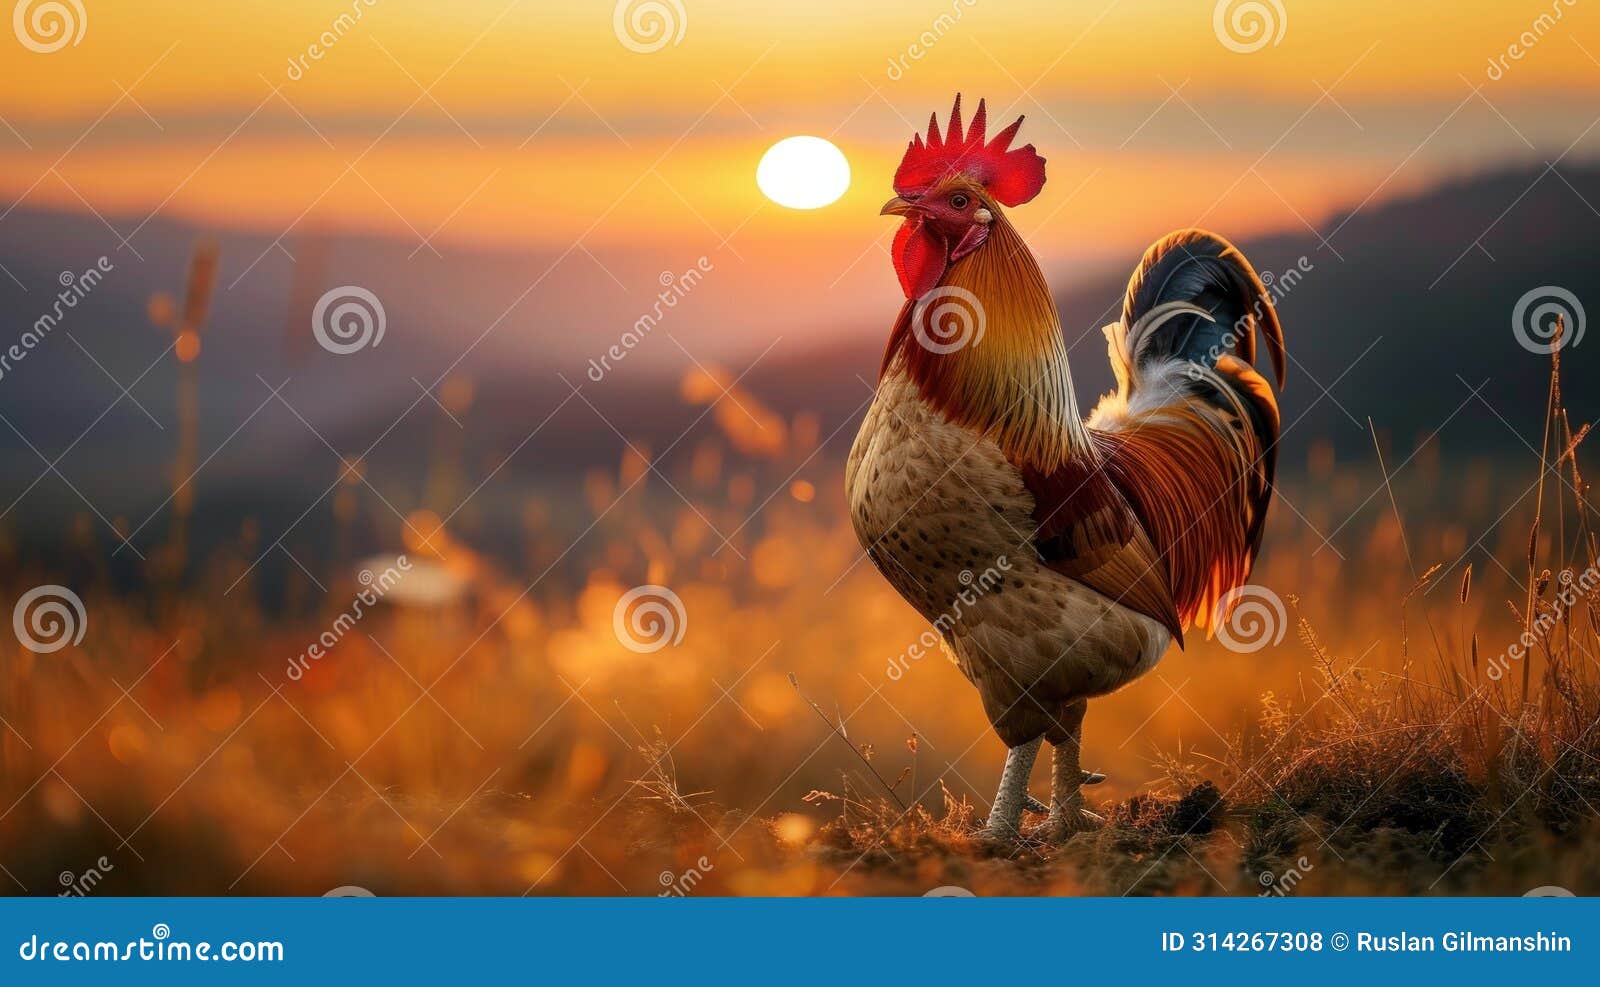 Rooster on Blurred Beautiful Sunrise Sky with Sun Light in Farm Autumn ...